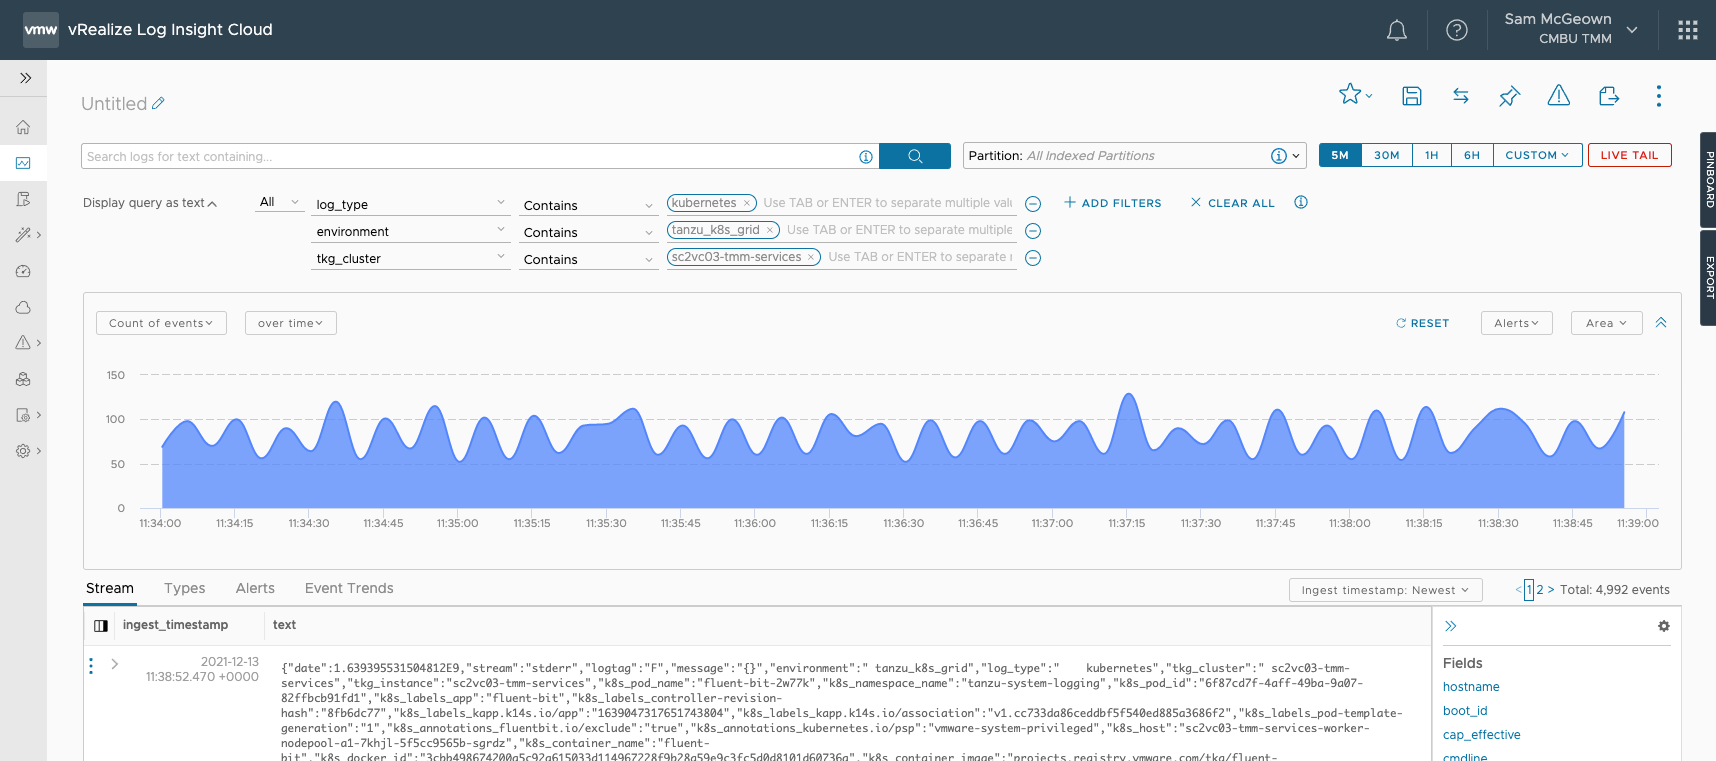 Log Insight Cloud with filters for TKG content